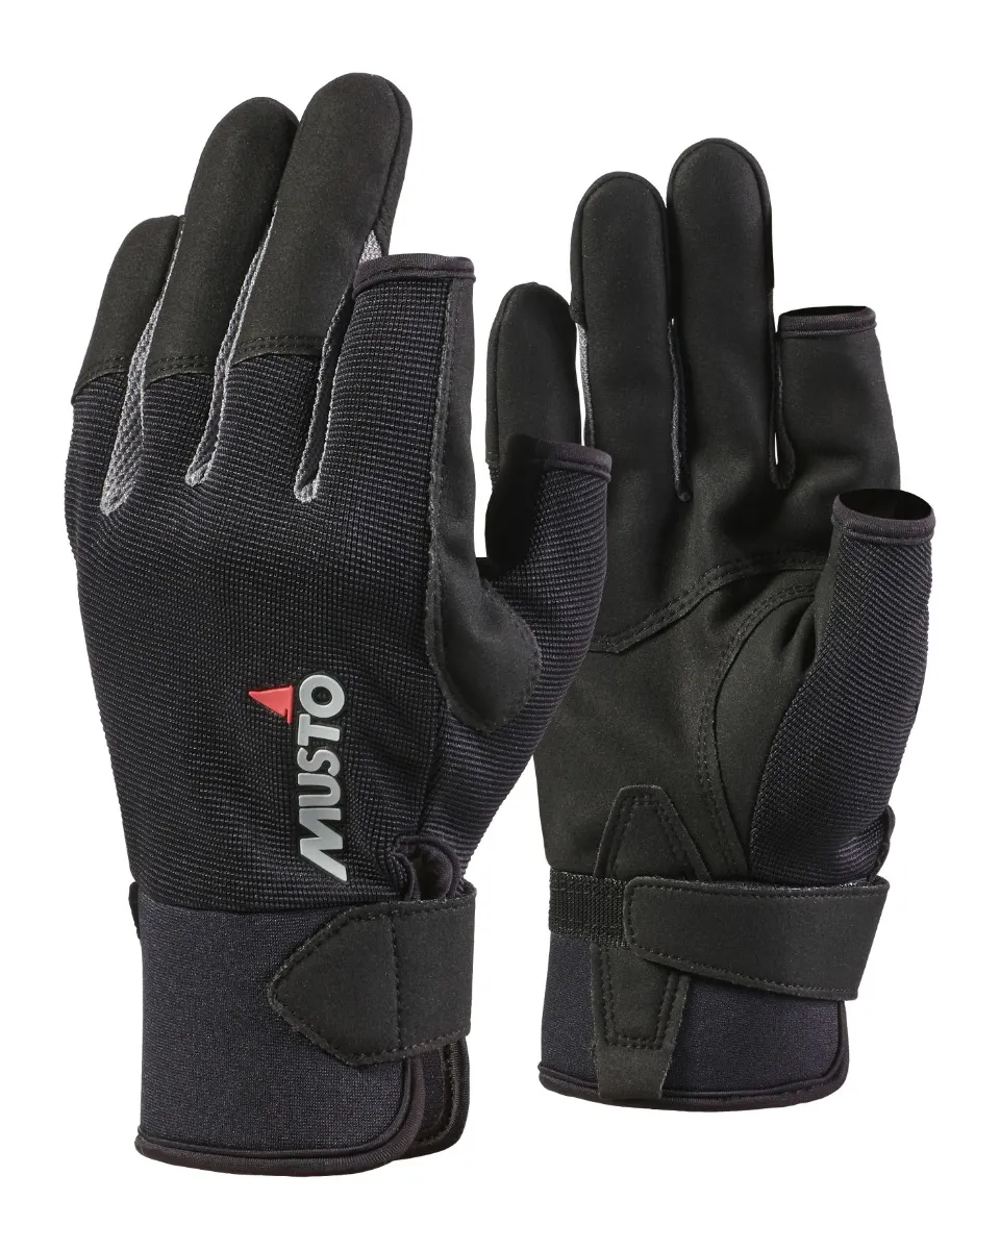 Musto Essential Sailing Long Finger Gloves